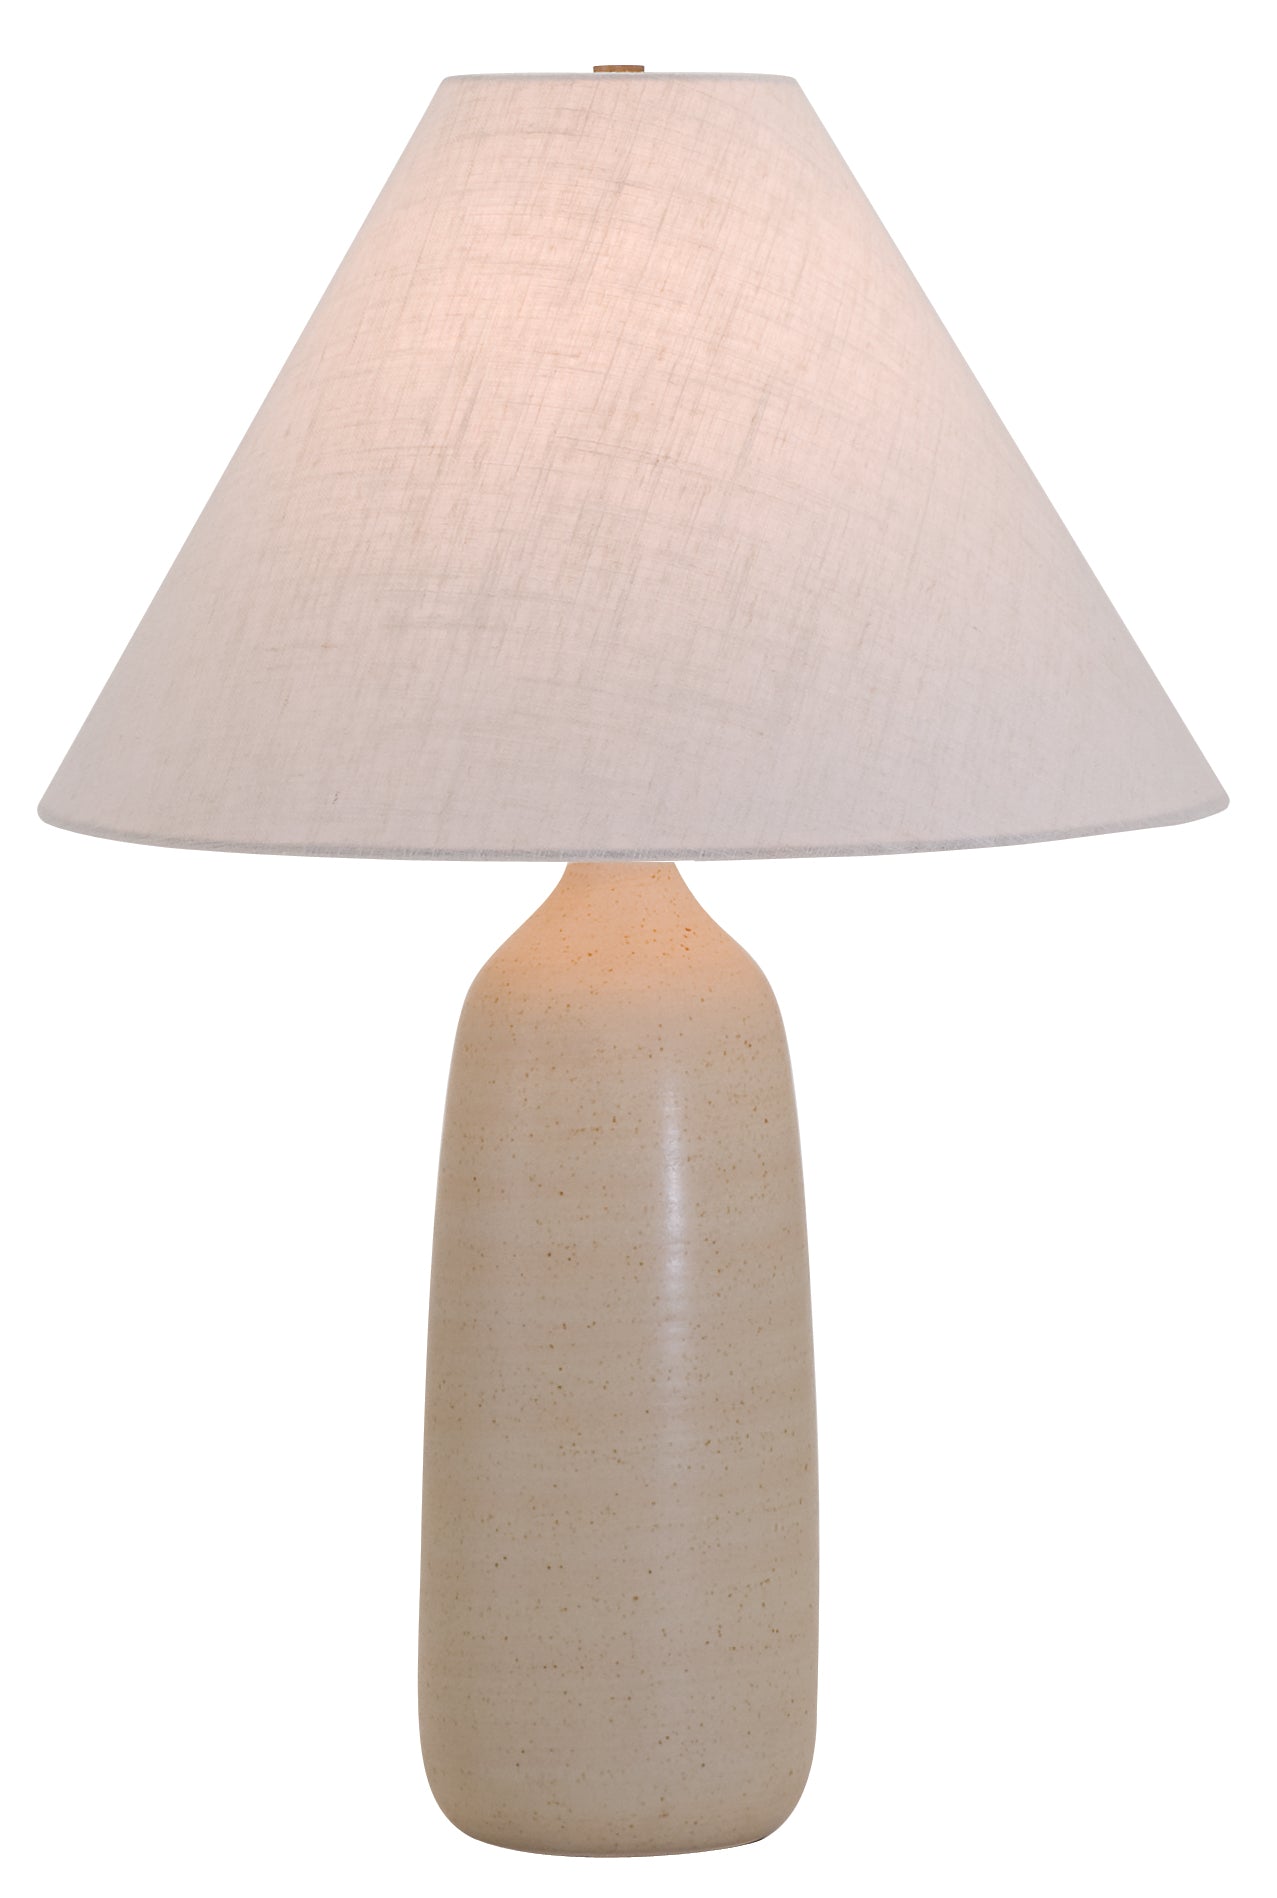 House of Troy Scatchard 25" Stoneware Table Lamp in Oatmeal GS100-OT